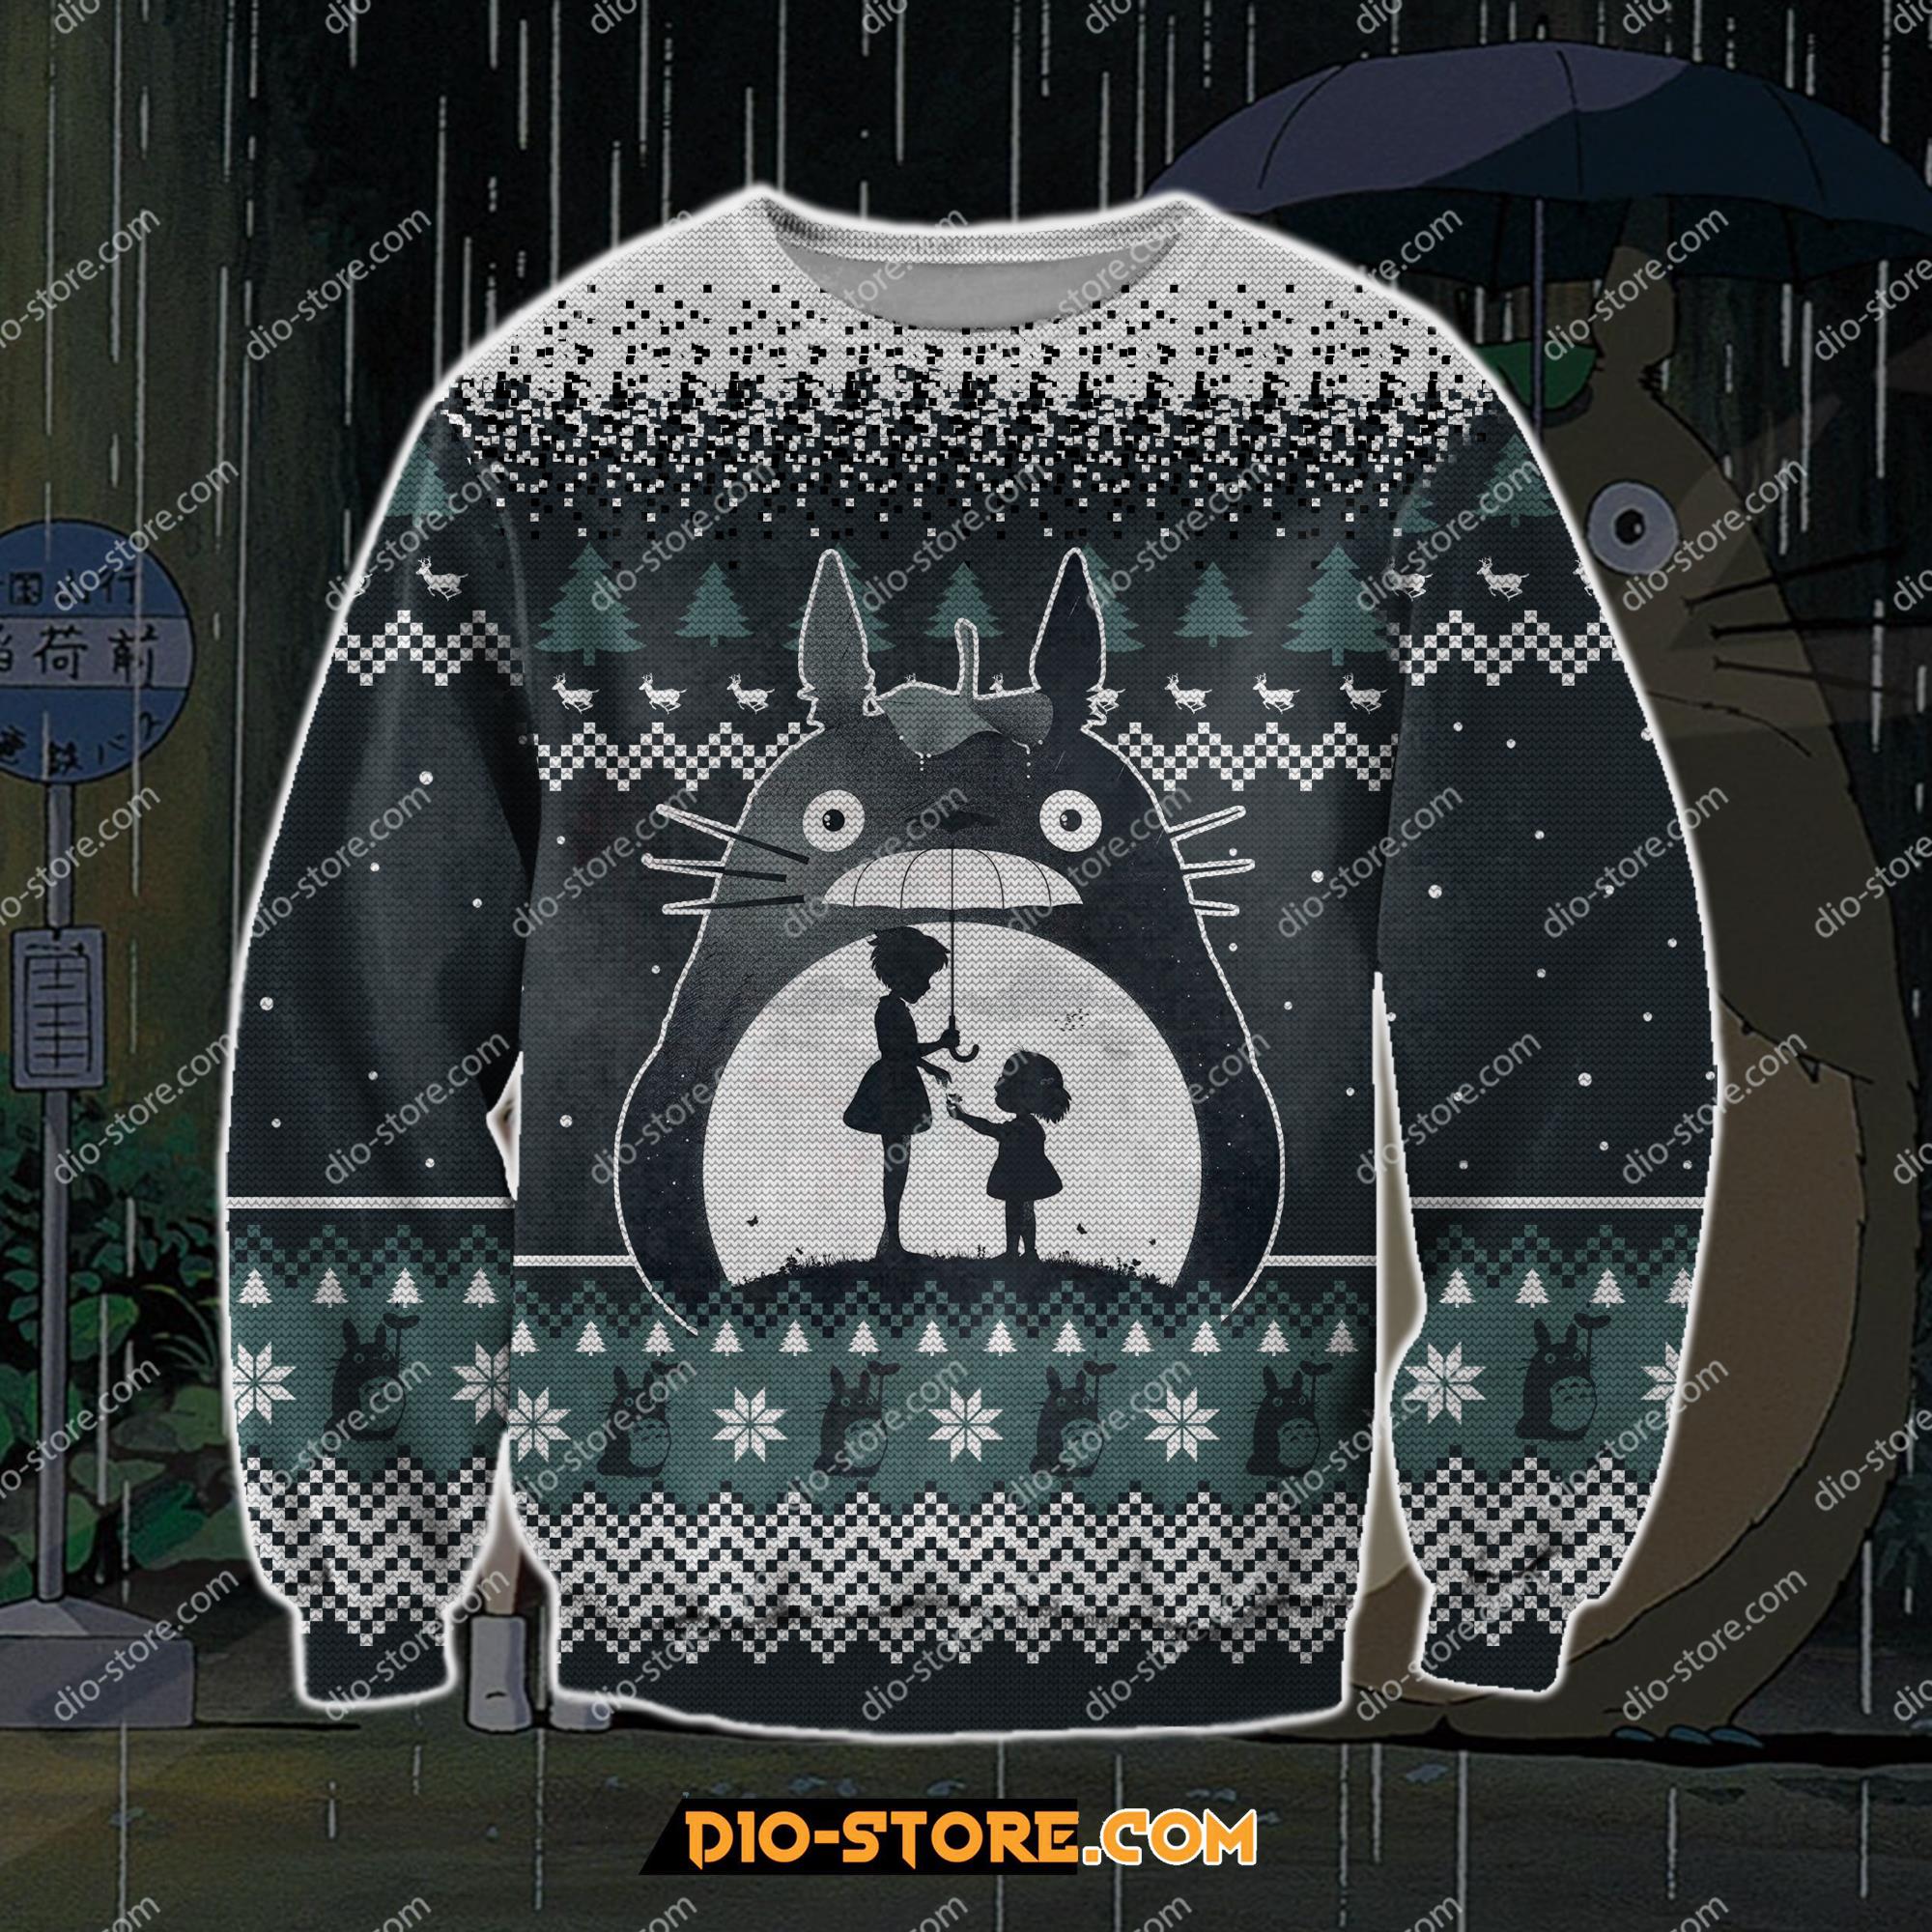 Totoro Spirited Away 3D Print Ugly Christmas Sweater Hoodie All Over Printed Cint10126